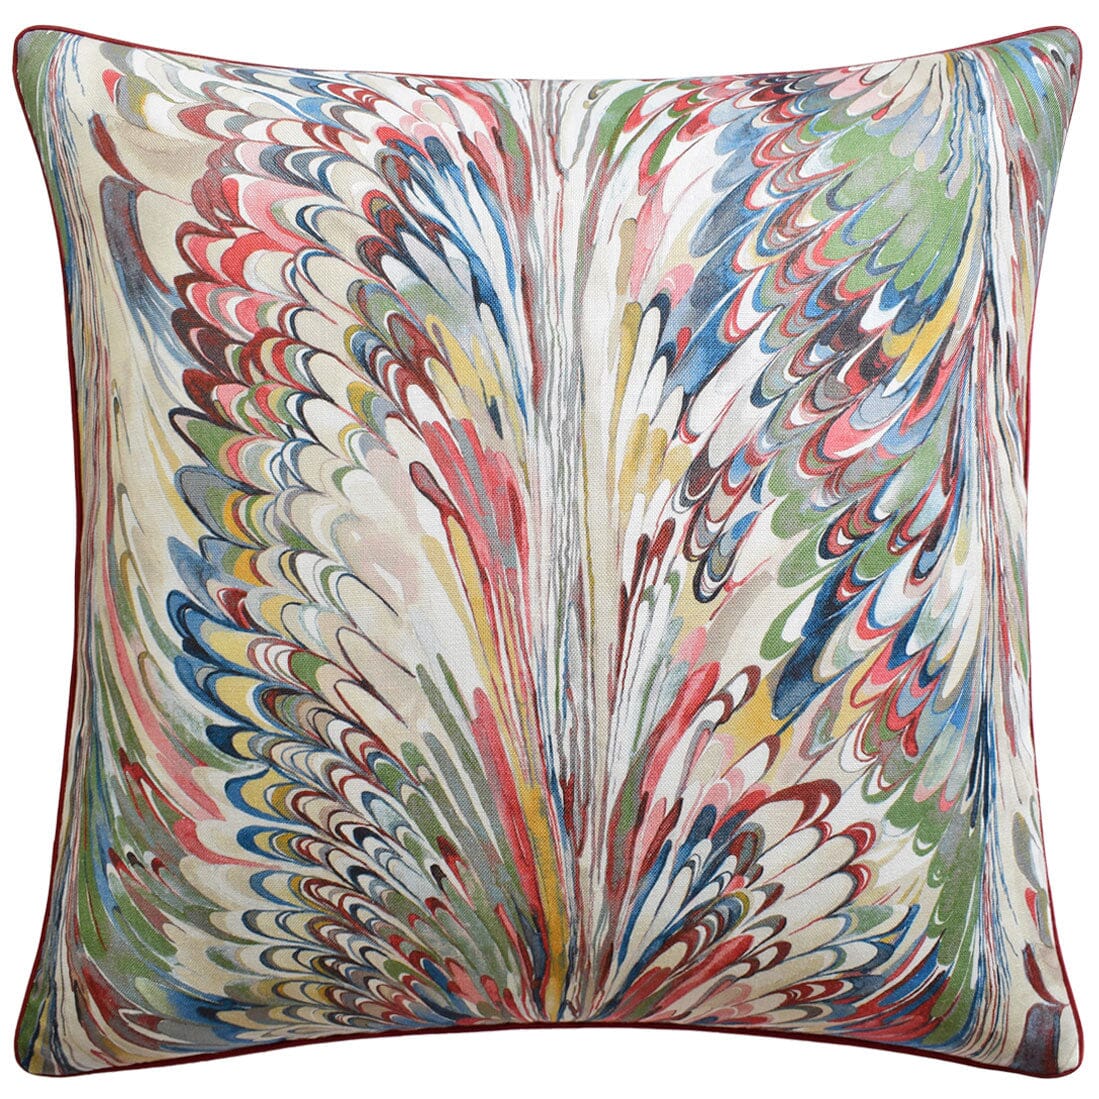 Taplow Spice and Leaf - Throw Pillow by Ryan Studio